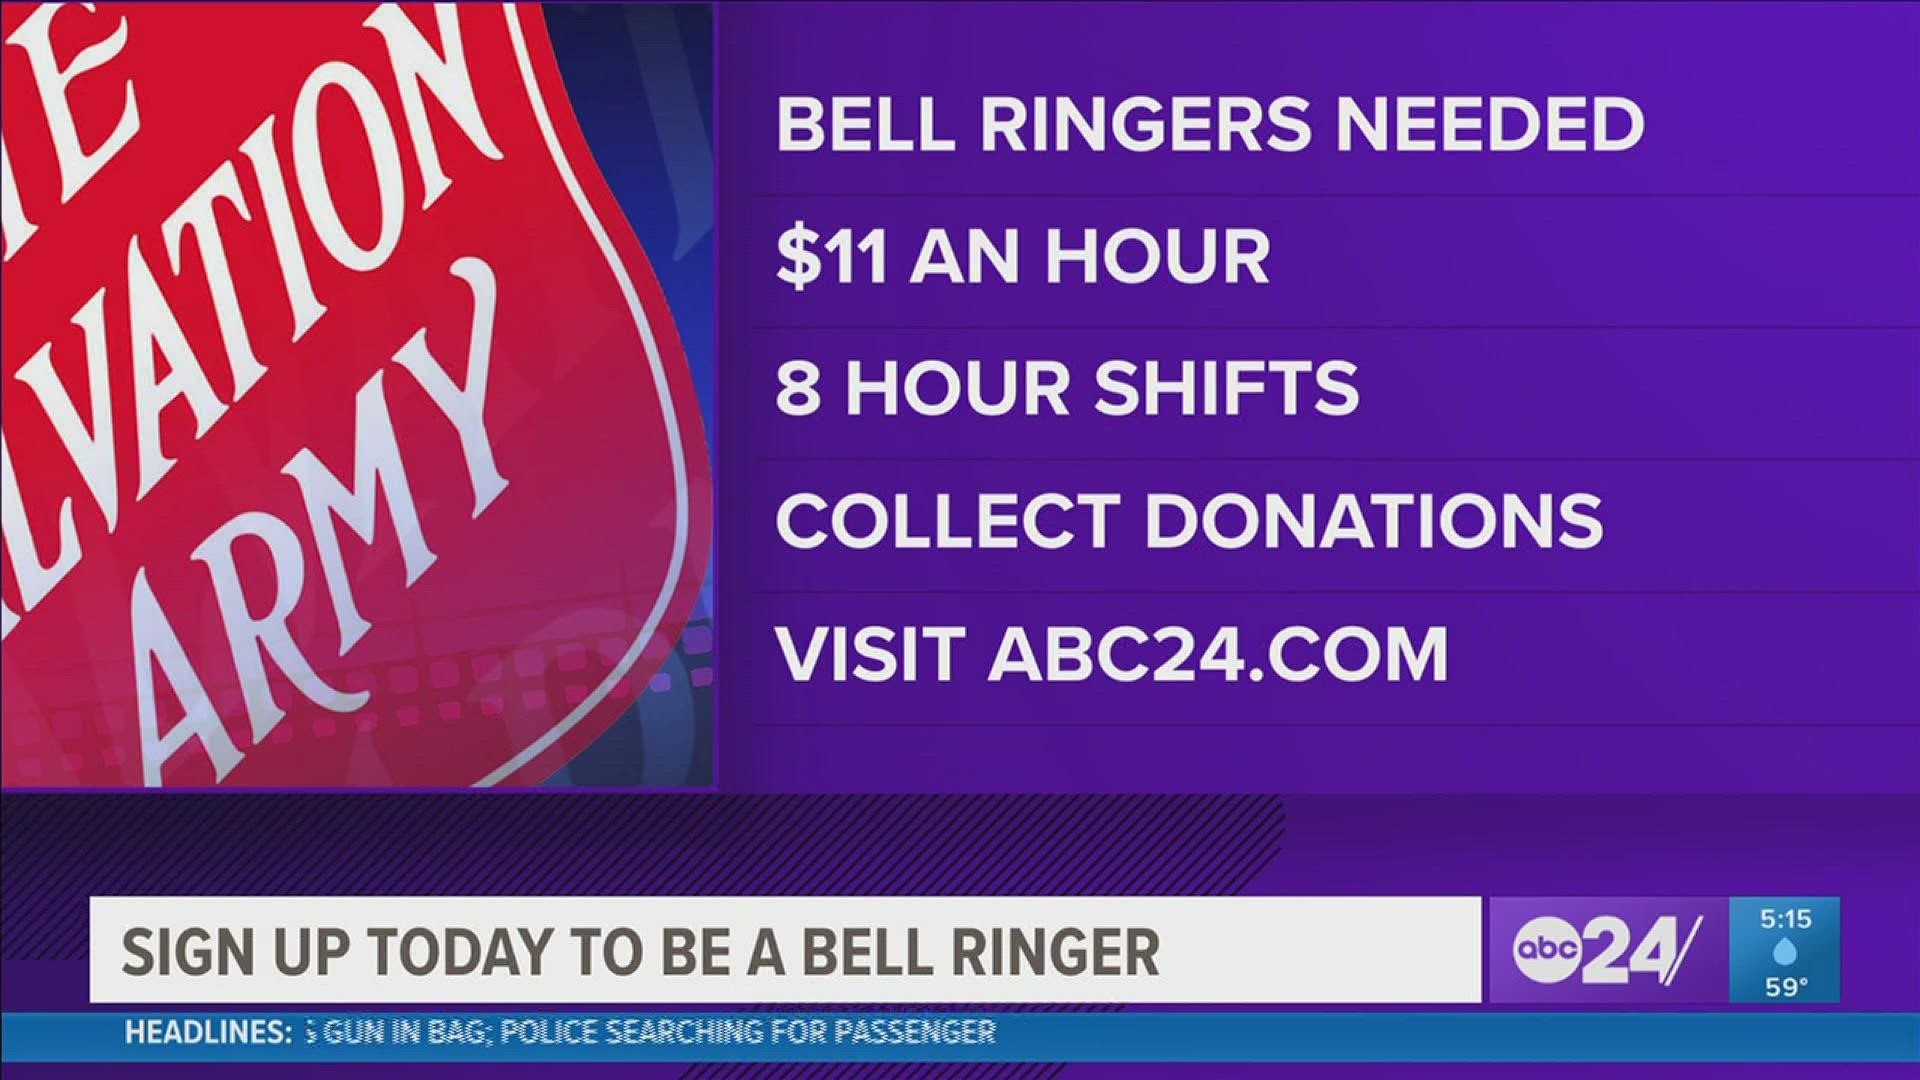 The Salvation Army of Memphis & the Mid-South is looking to bring in paid bell ringers this year.